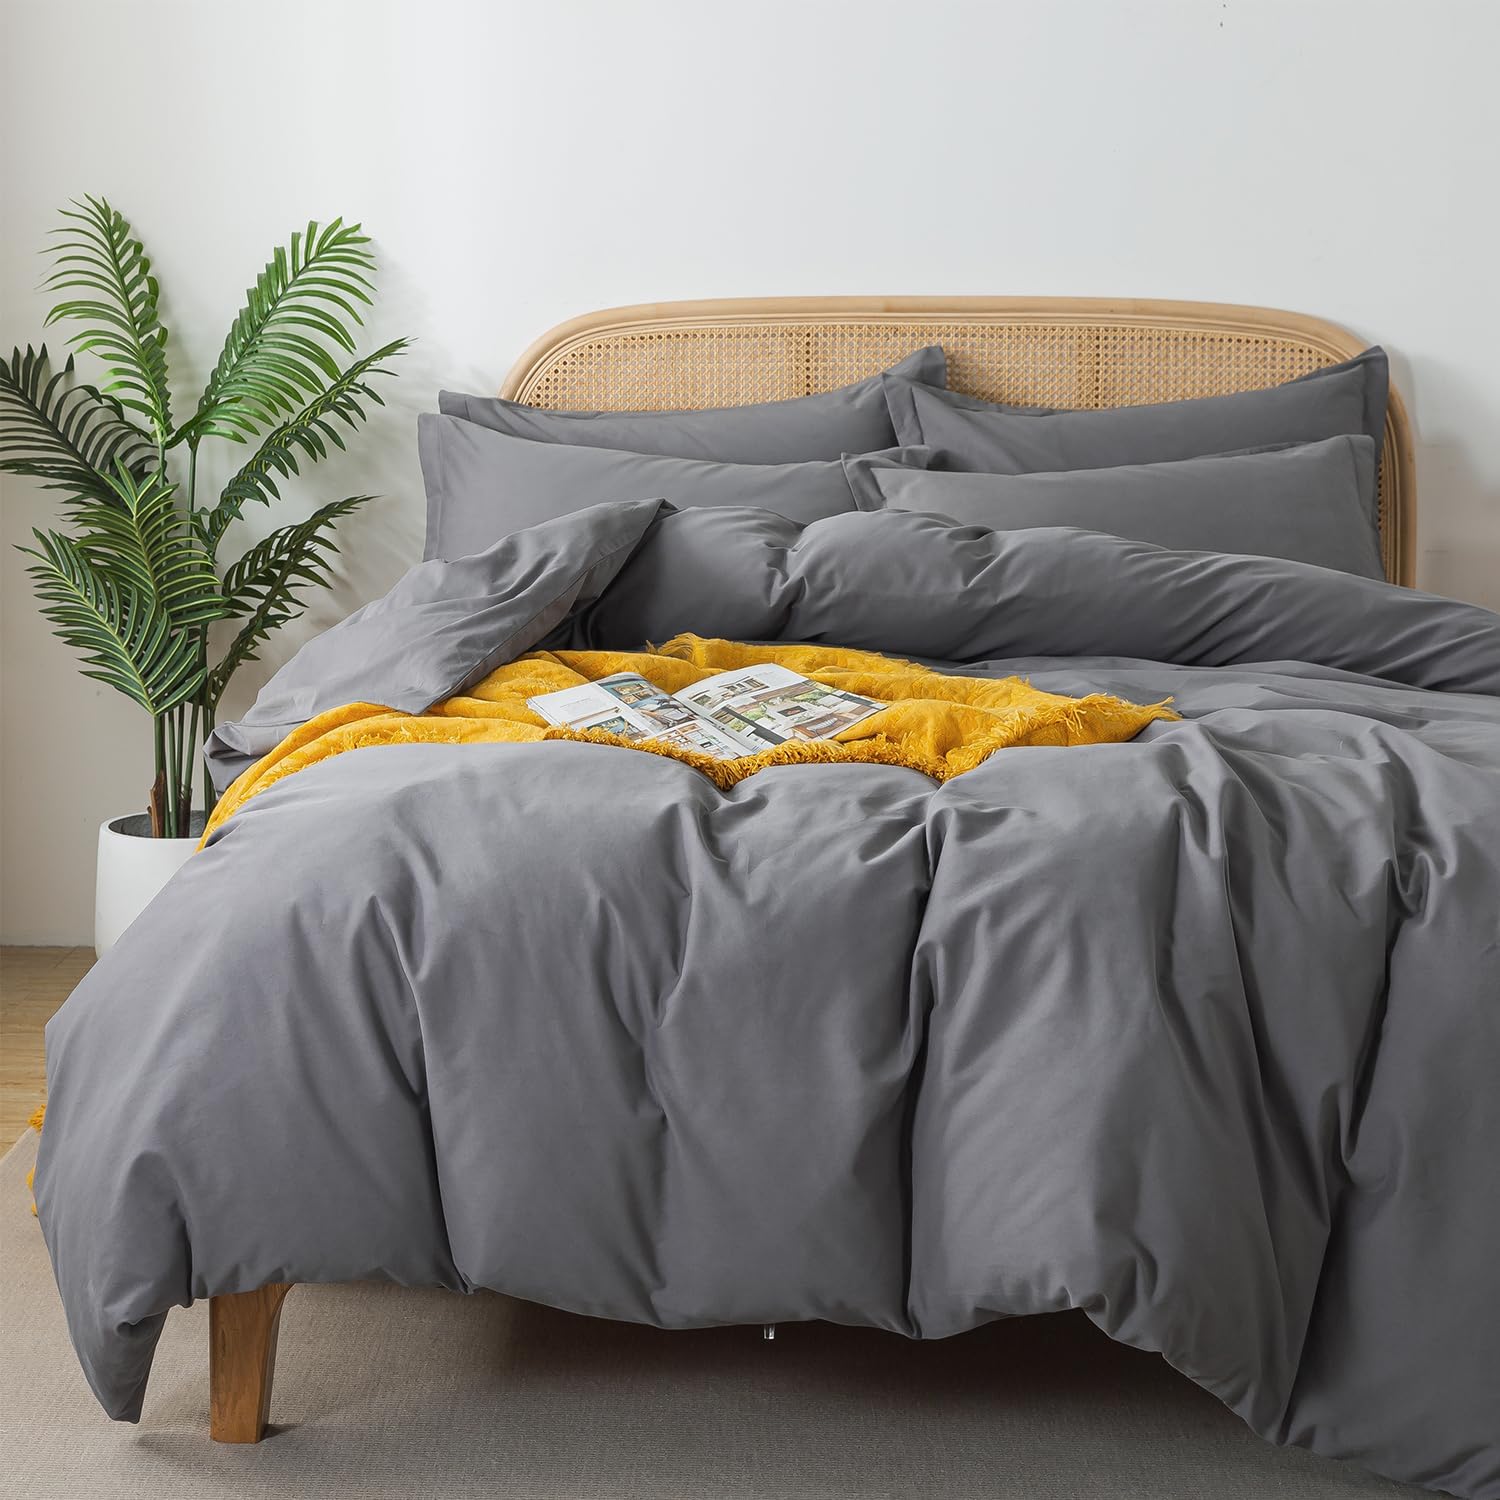 FADFAY Grey Queen Duvet Cover Set 100% Cotton Double Brushed, Soft Breathable Dark Grey Duvet Cover 3 Piece, 1 Duvet Cover with Zipper Closure and 2 Pillow Shams, No Comforter Included